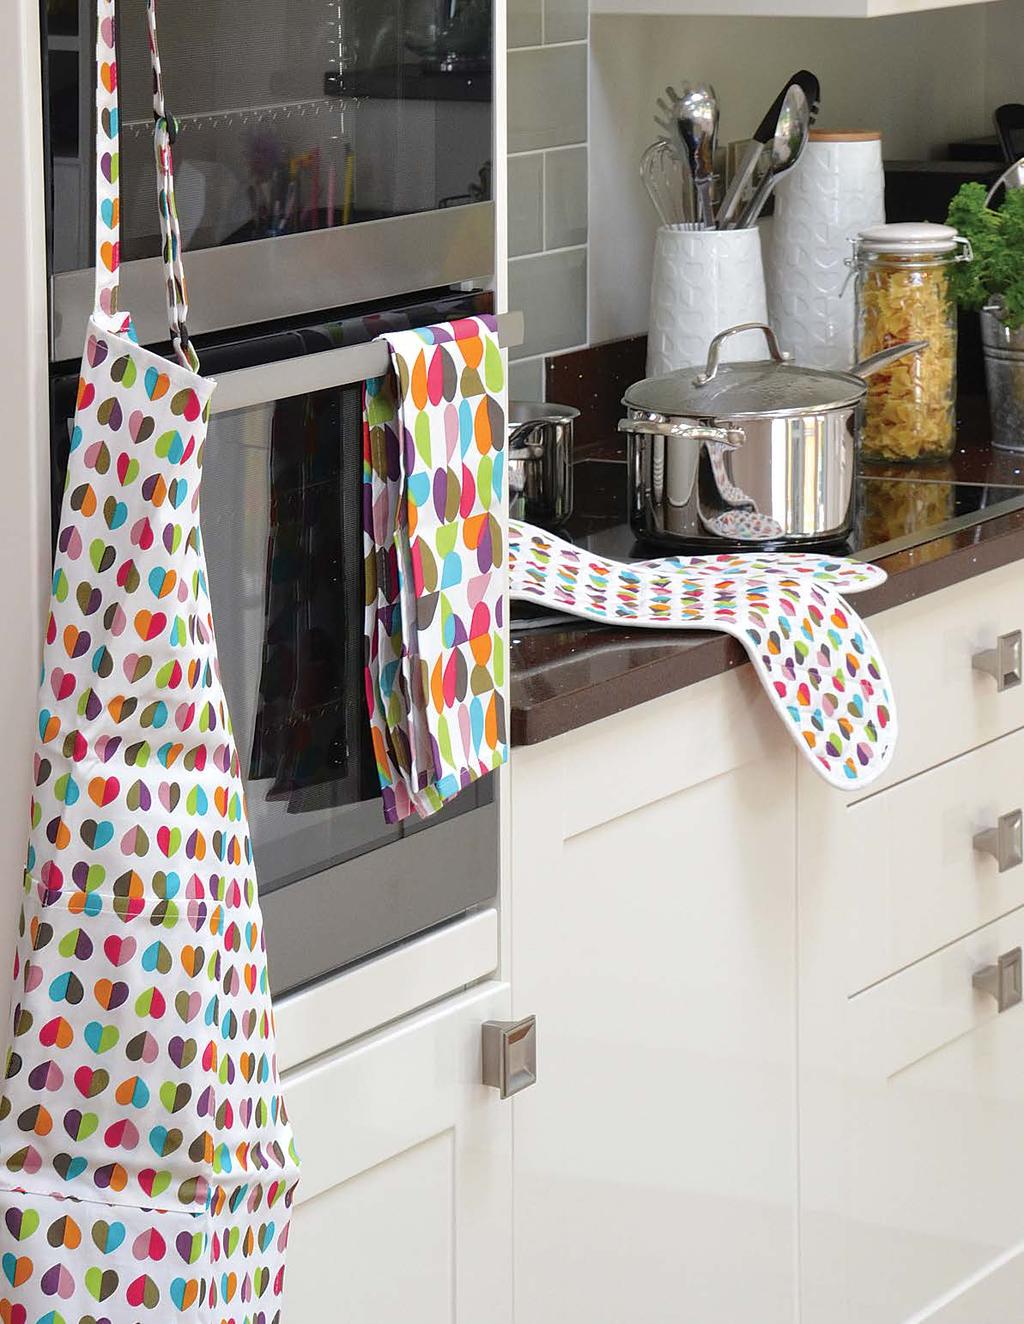 Confetti Brokenhearted & Blooming Lovely Textiles Delightful prints to cheer any kitchen!